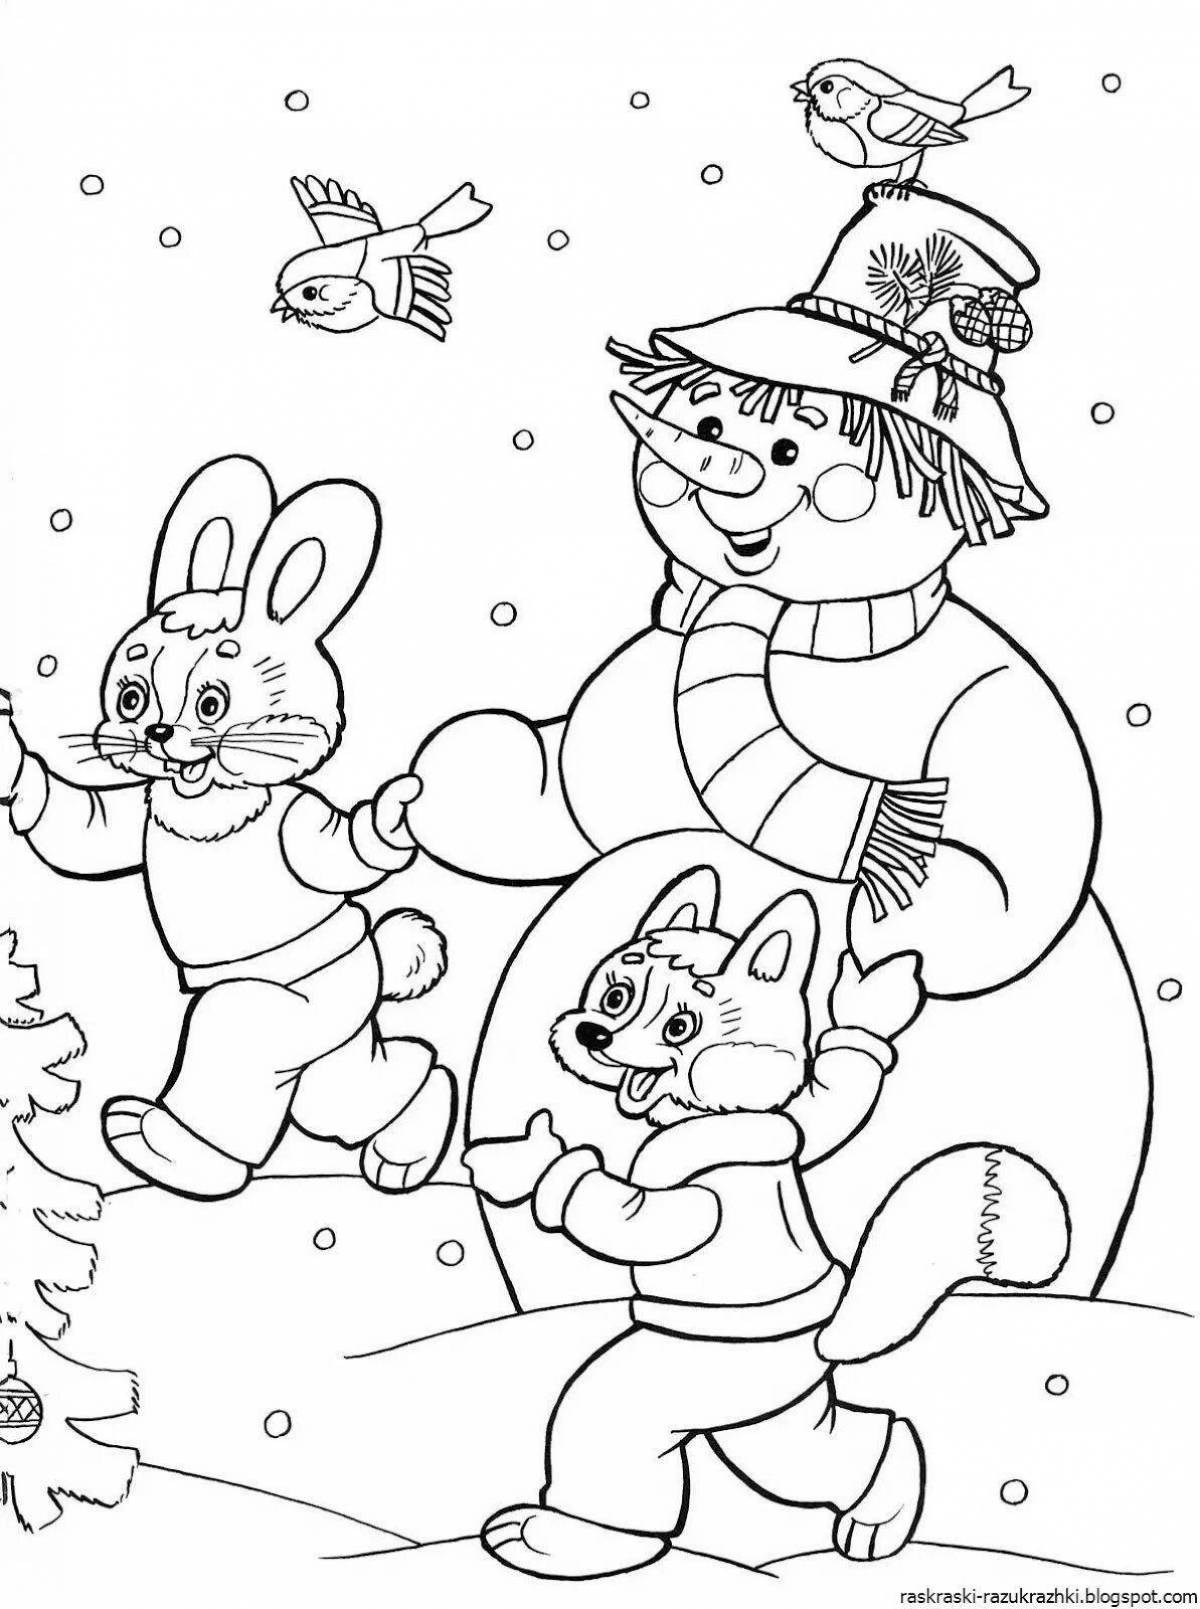 Colorful winter coloring book for preschoolers